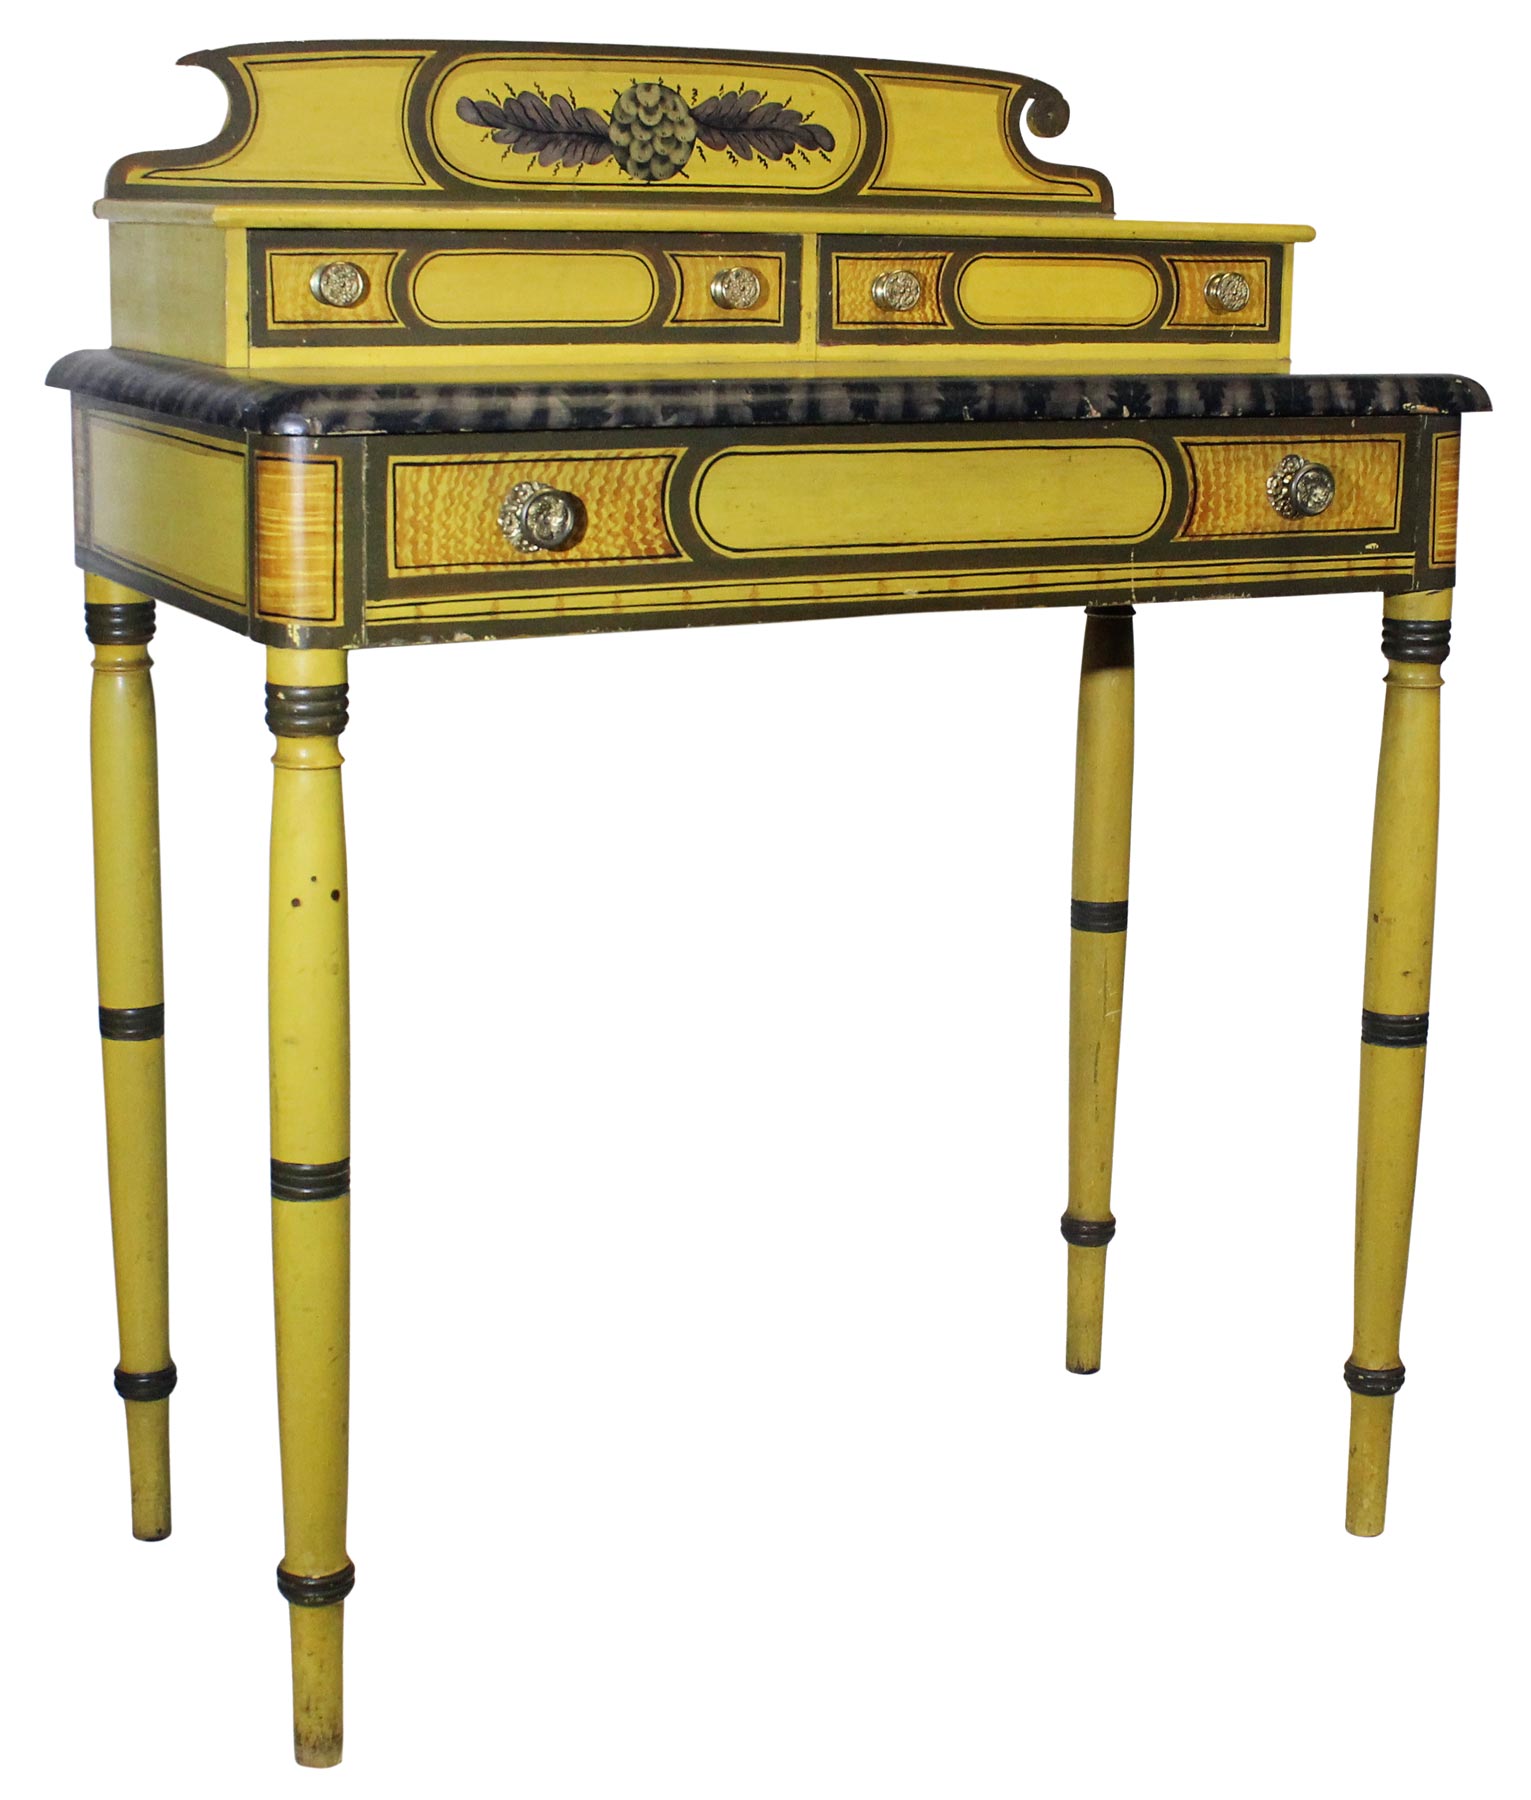 Attributed to the Willard Harris shop (1808–1831), painted by David Harris (1803–1855), dressing table, Newport, New Hampshire, c. 1828–1830